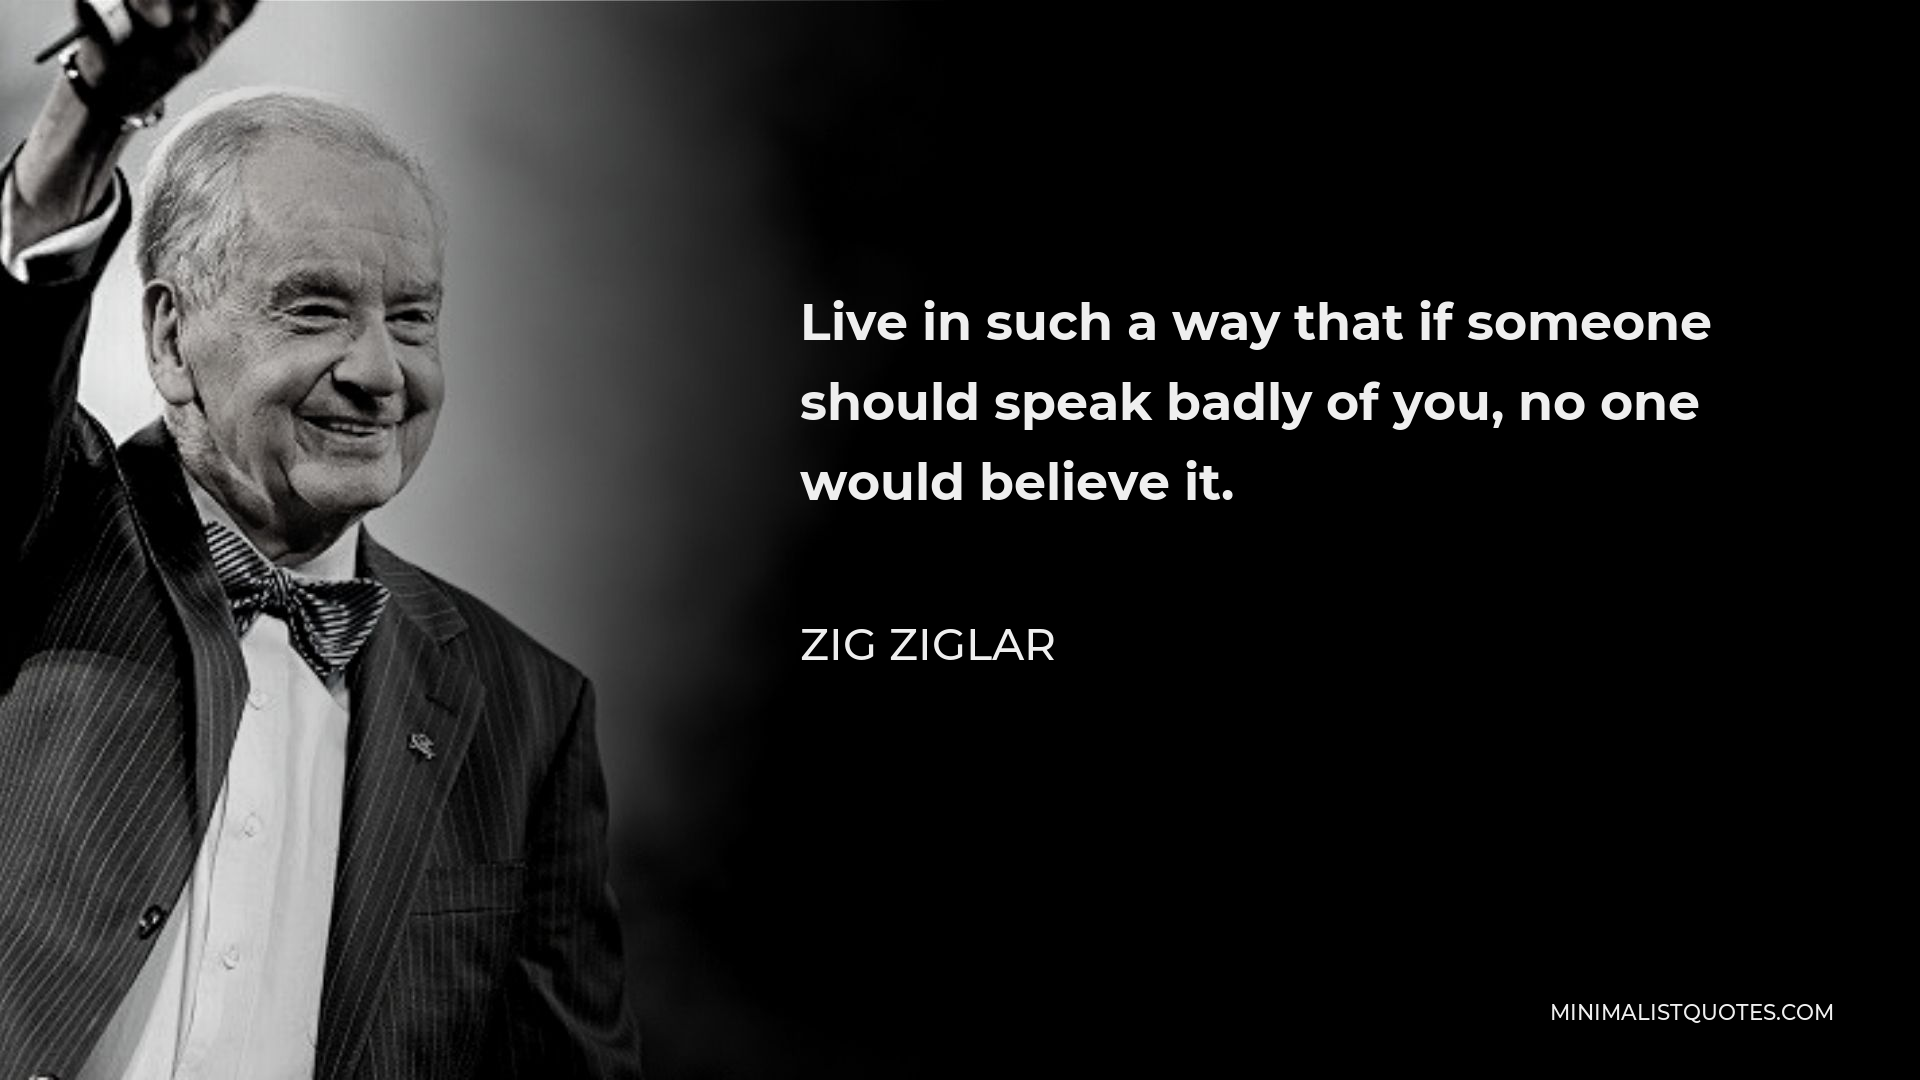 Zig Ziglar Quote - Live in such a way that if someone should speak badly of you, no one would believe it.